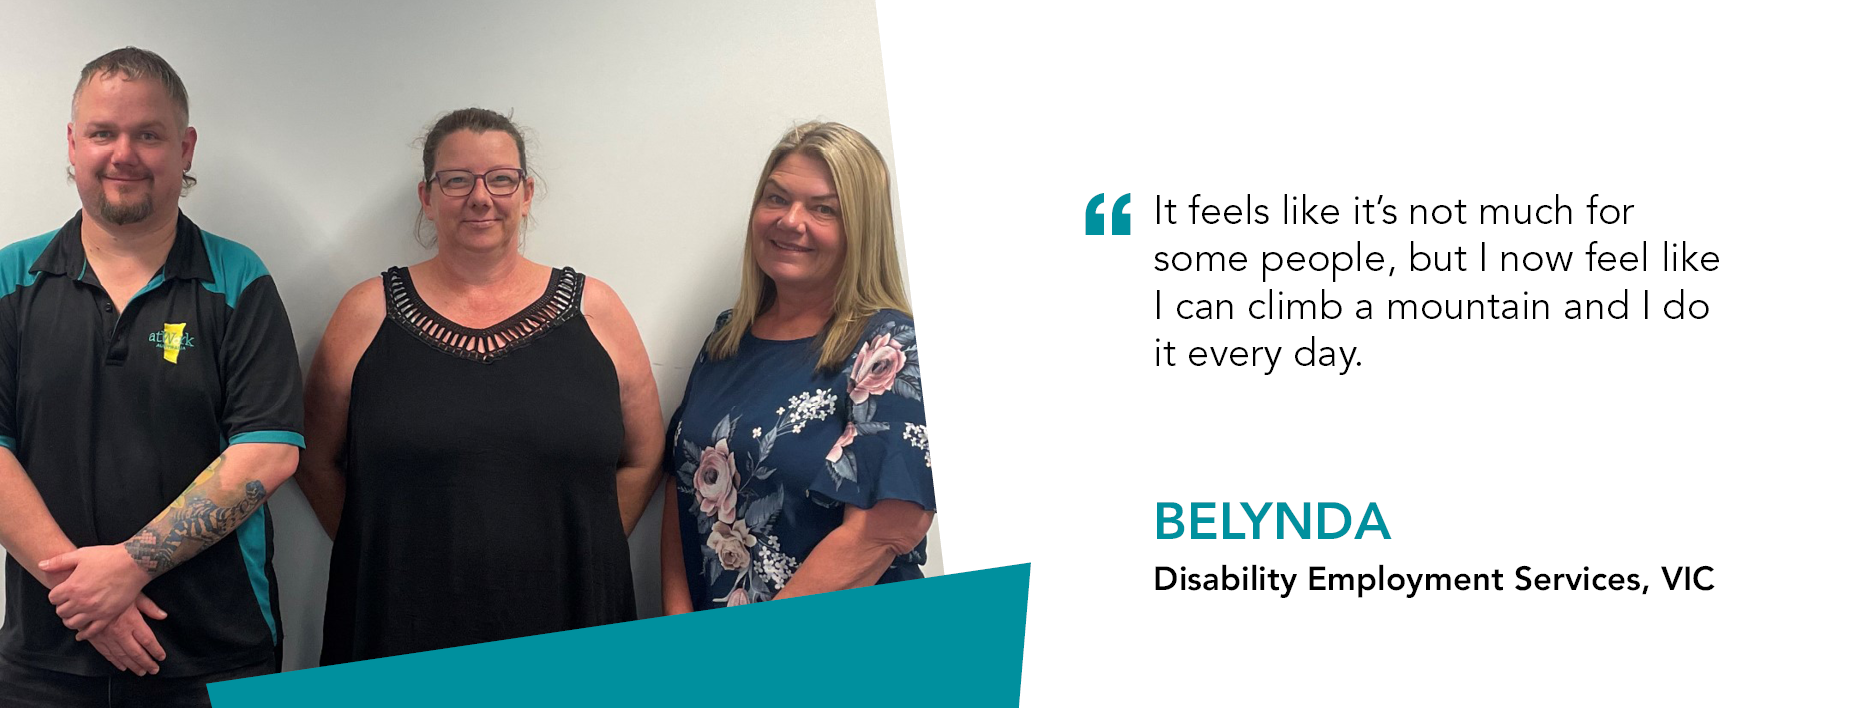 Quote reads: "It feels like it's not much for some people, but I now feel like I can climb a mountain and I do it everyday" said Belynda, Disability Employment Services Client, VIC.